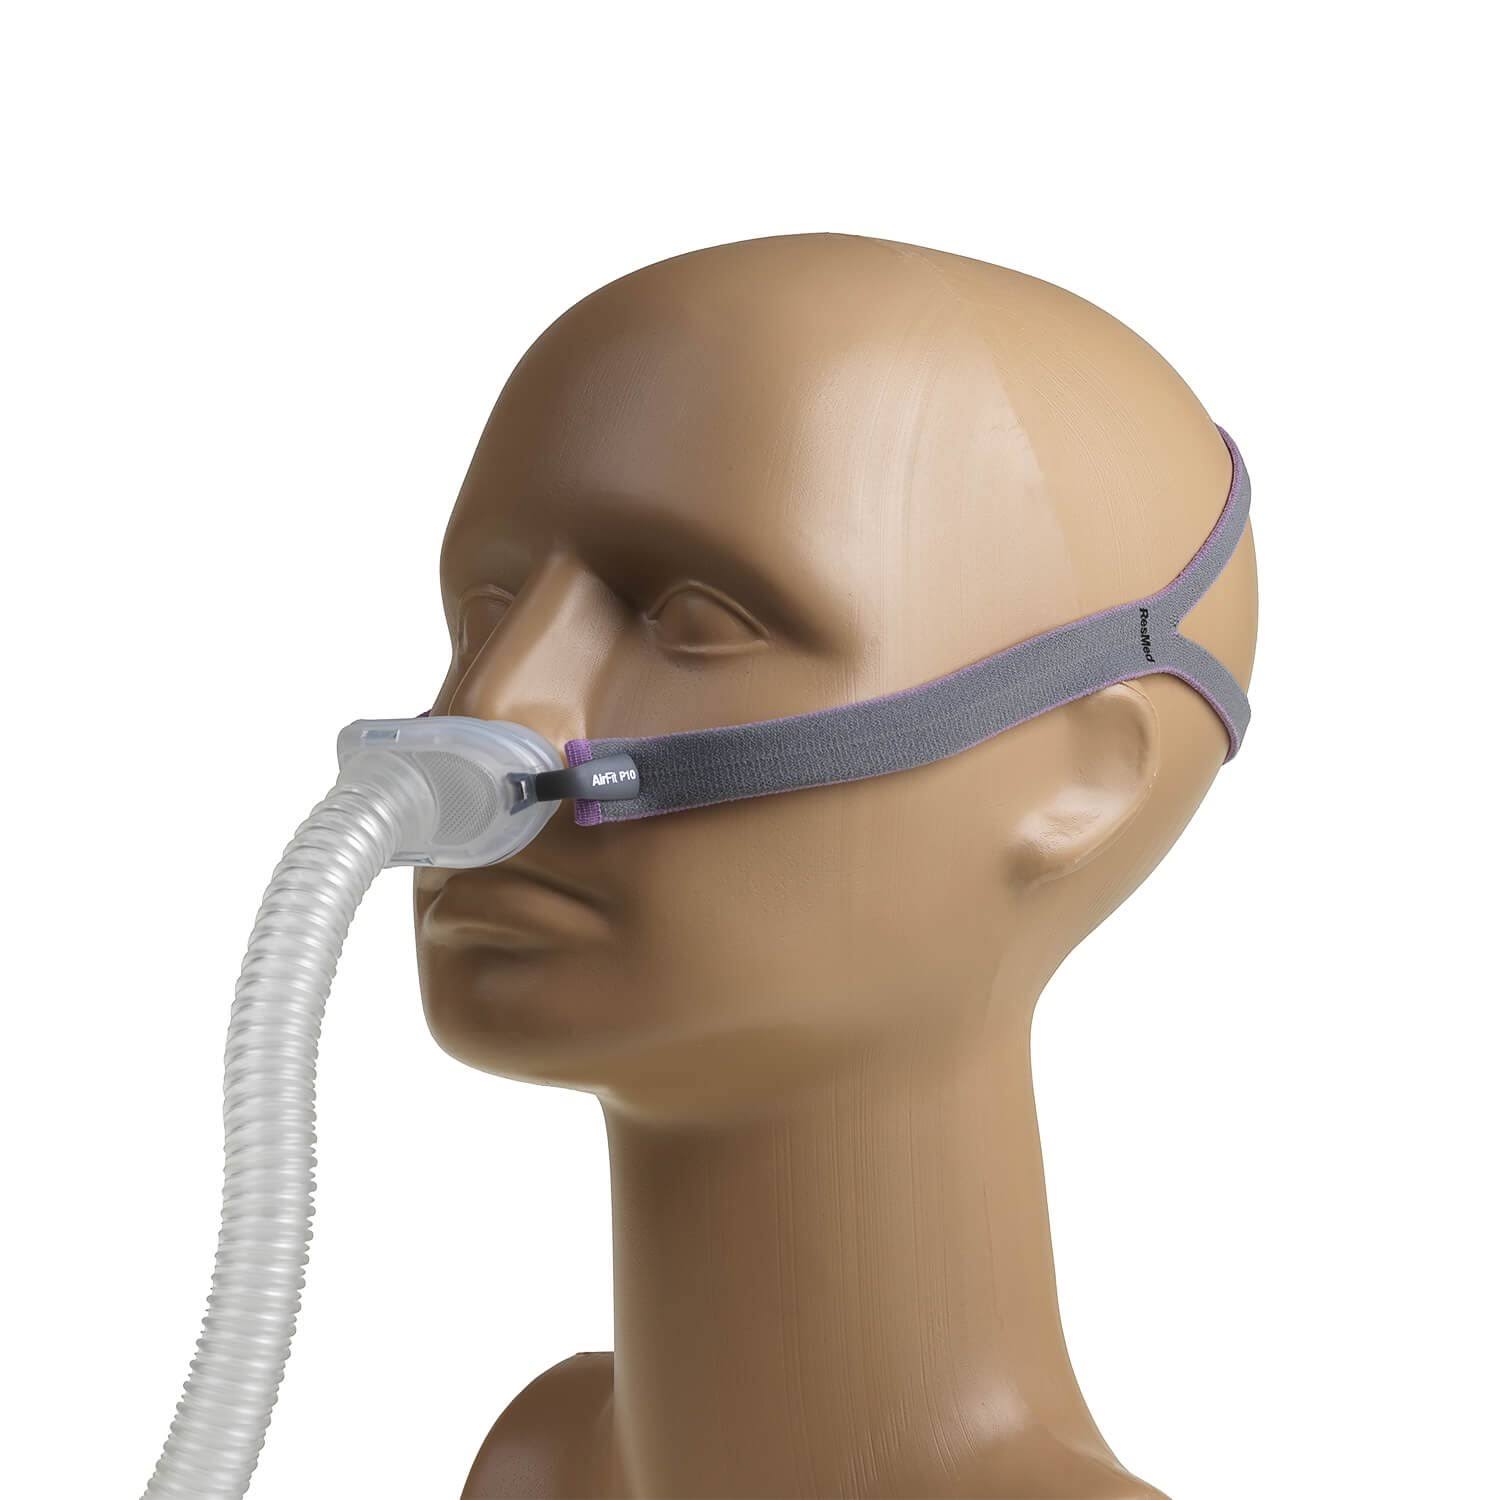 35% Off - New AirFit P10 Nasal Pillow CPAP Mask with Headgear, Size S